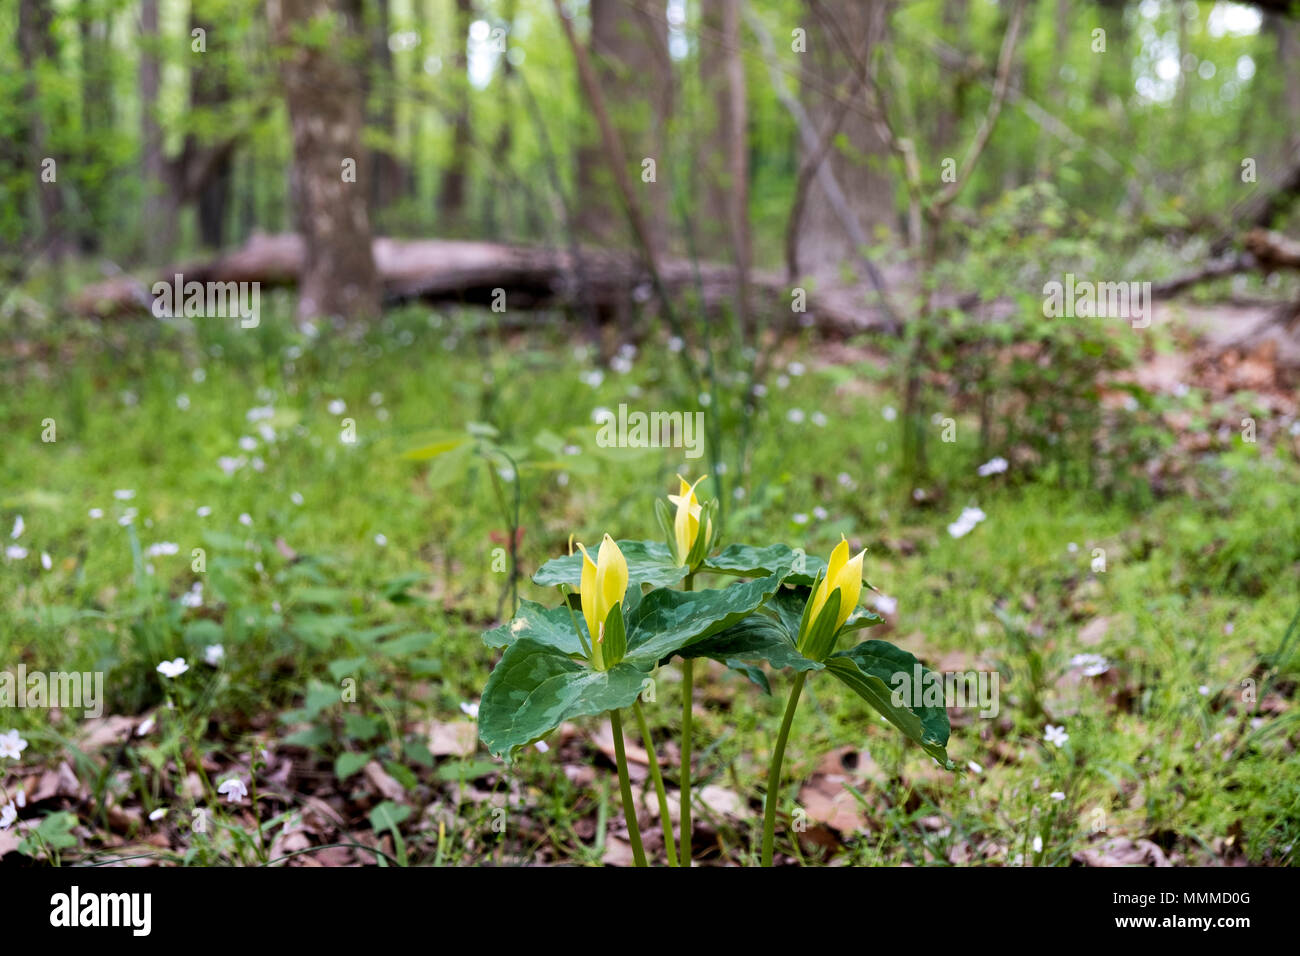 Trillium luteum or Yellow Trillium with native plants and flowers, Bowman's Hill Wildflower Preserve, New Hope, Bucks County, Pennsylvania, Stock Photo